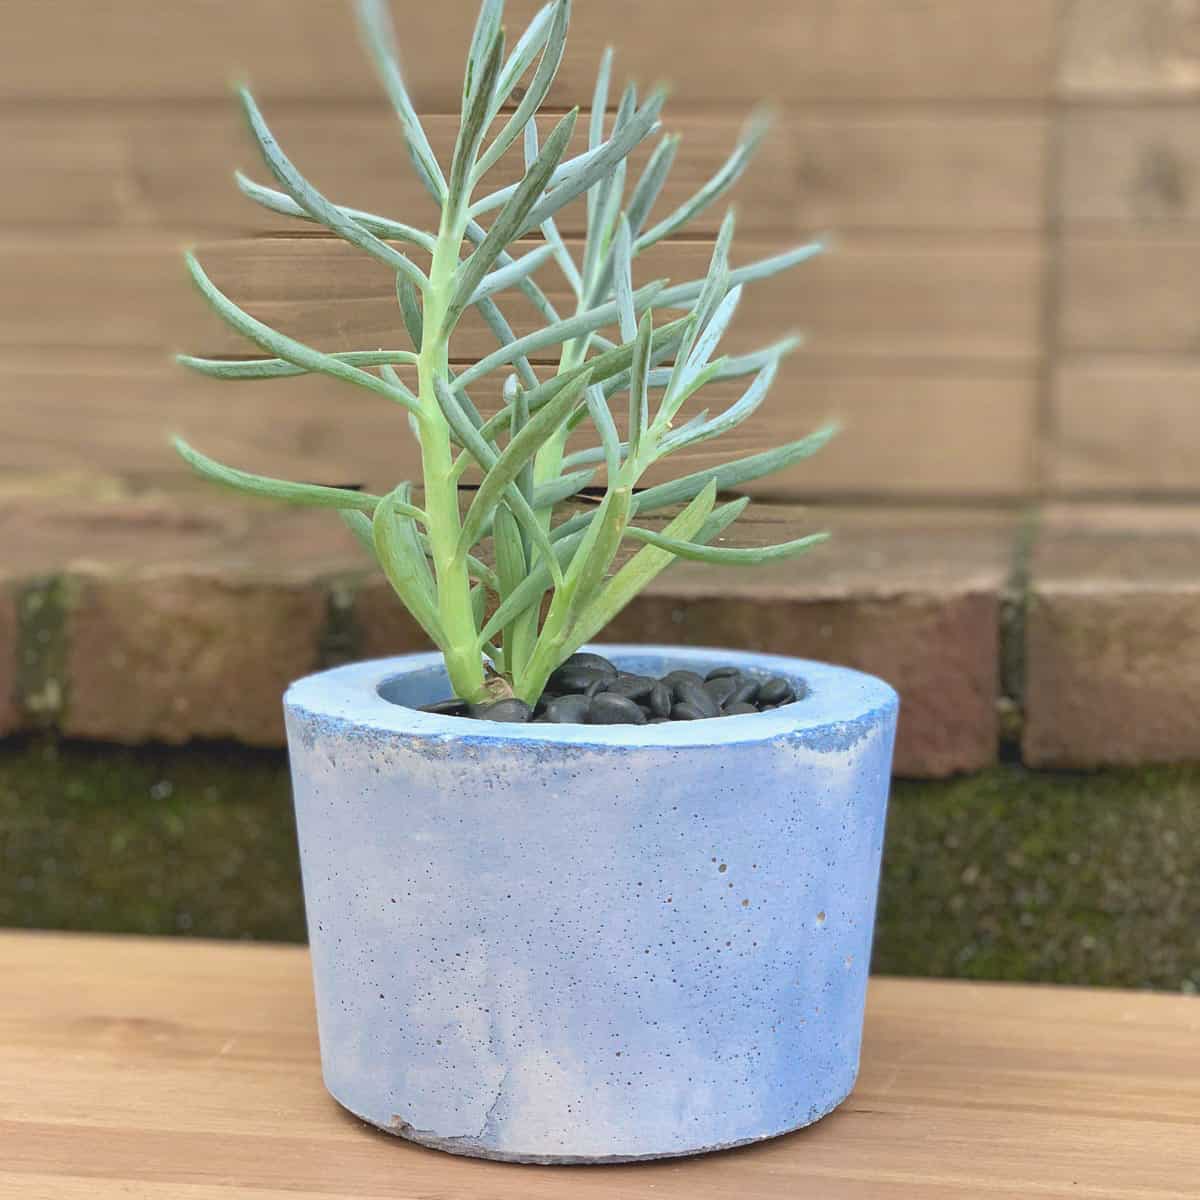 Make a Stained DIY Concrete Planter